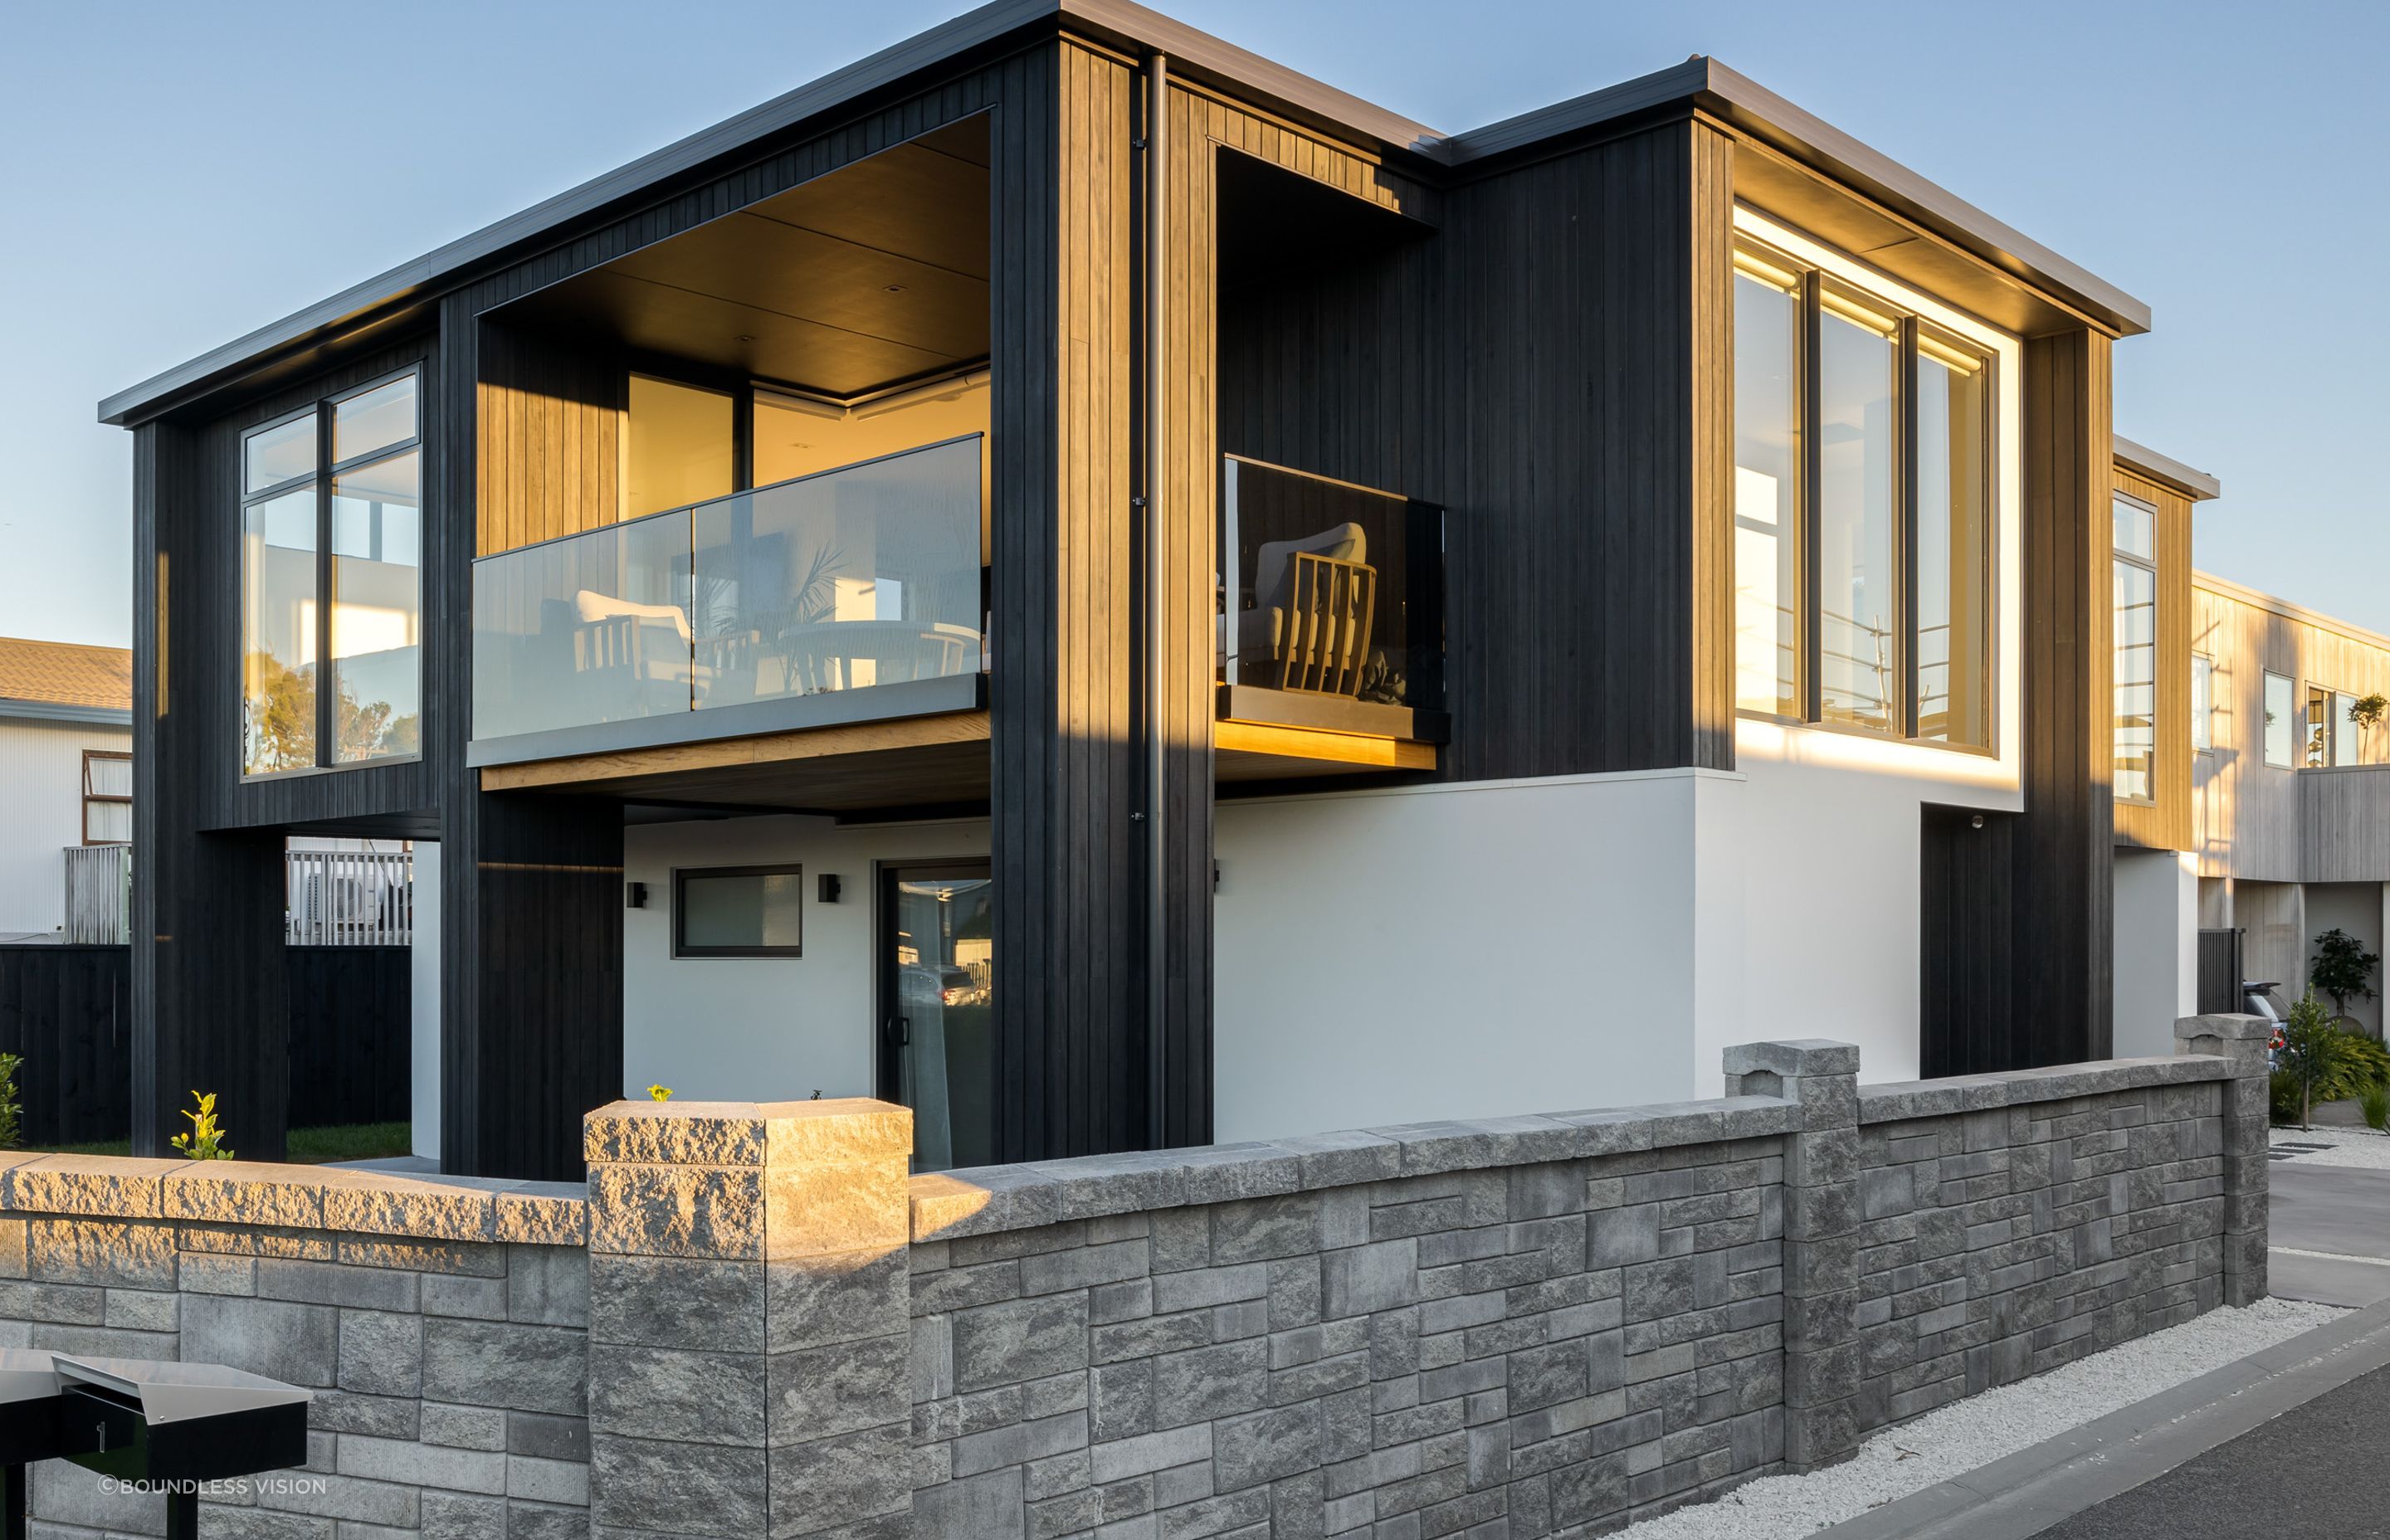 The two-storey home is part of a new coastal development by Flowerday Homes in Bay of Plenty.